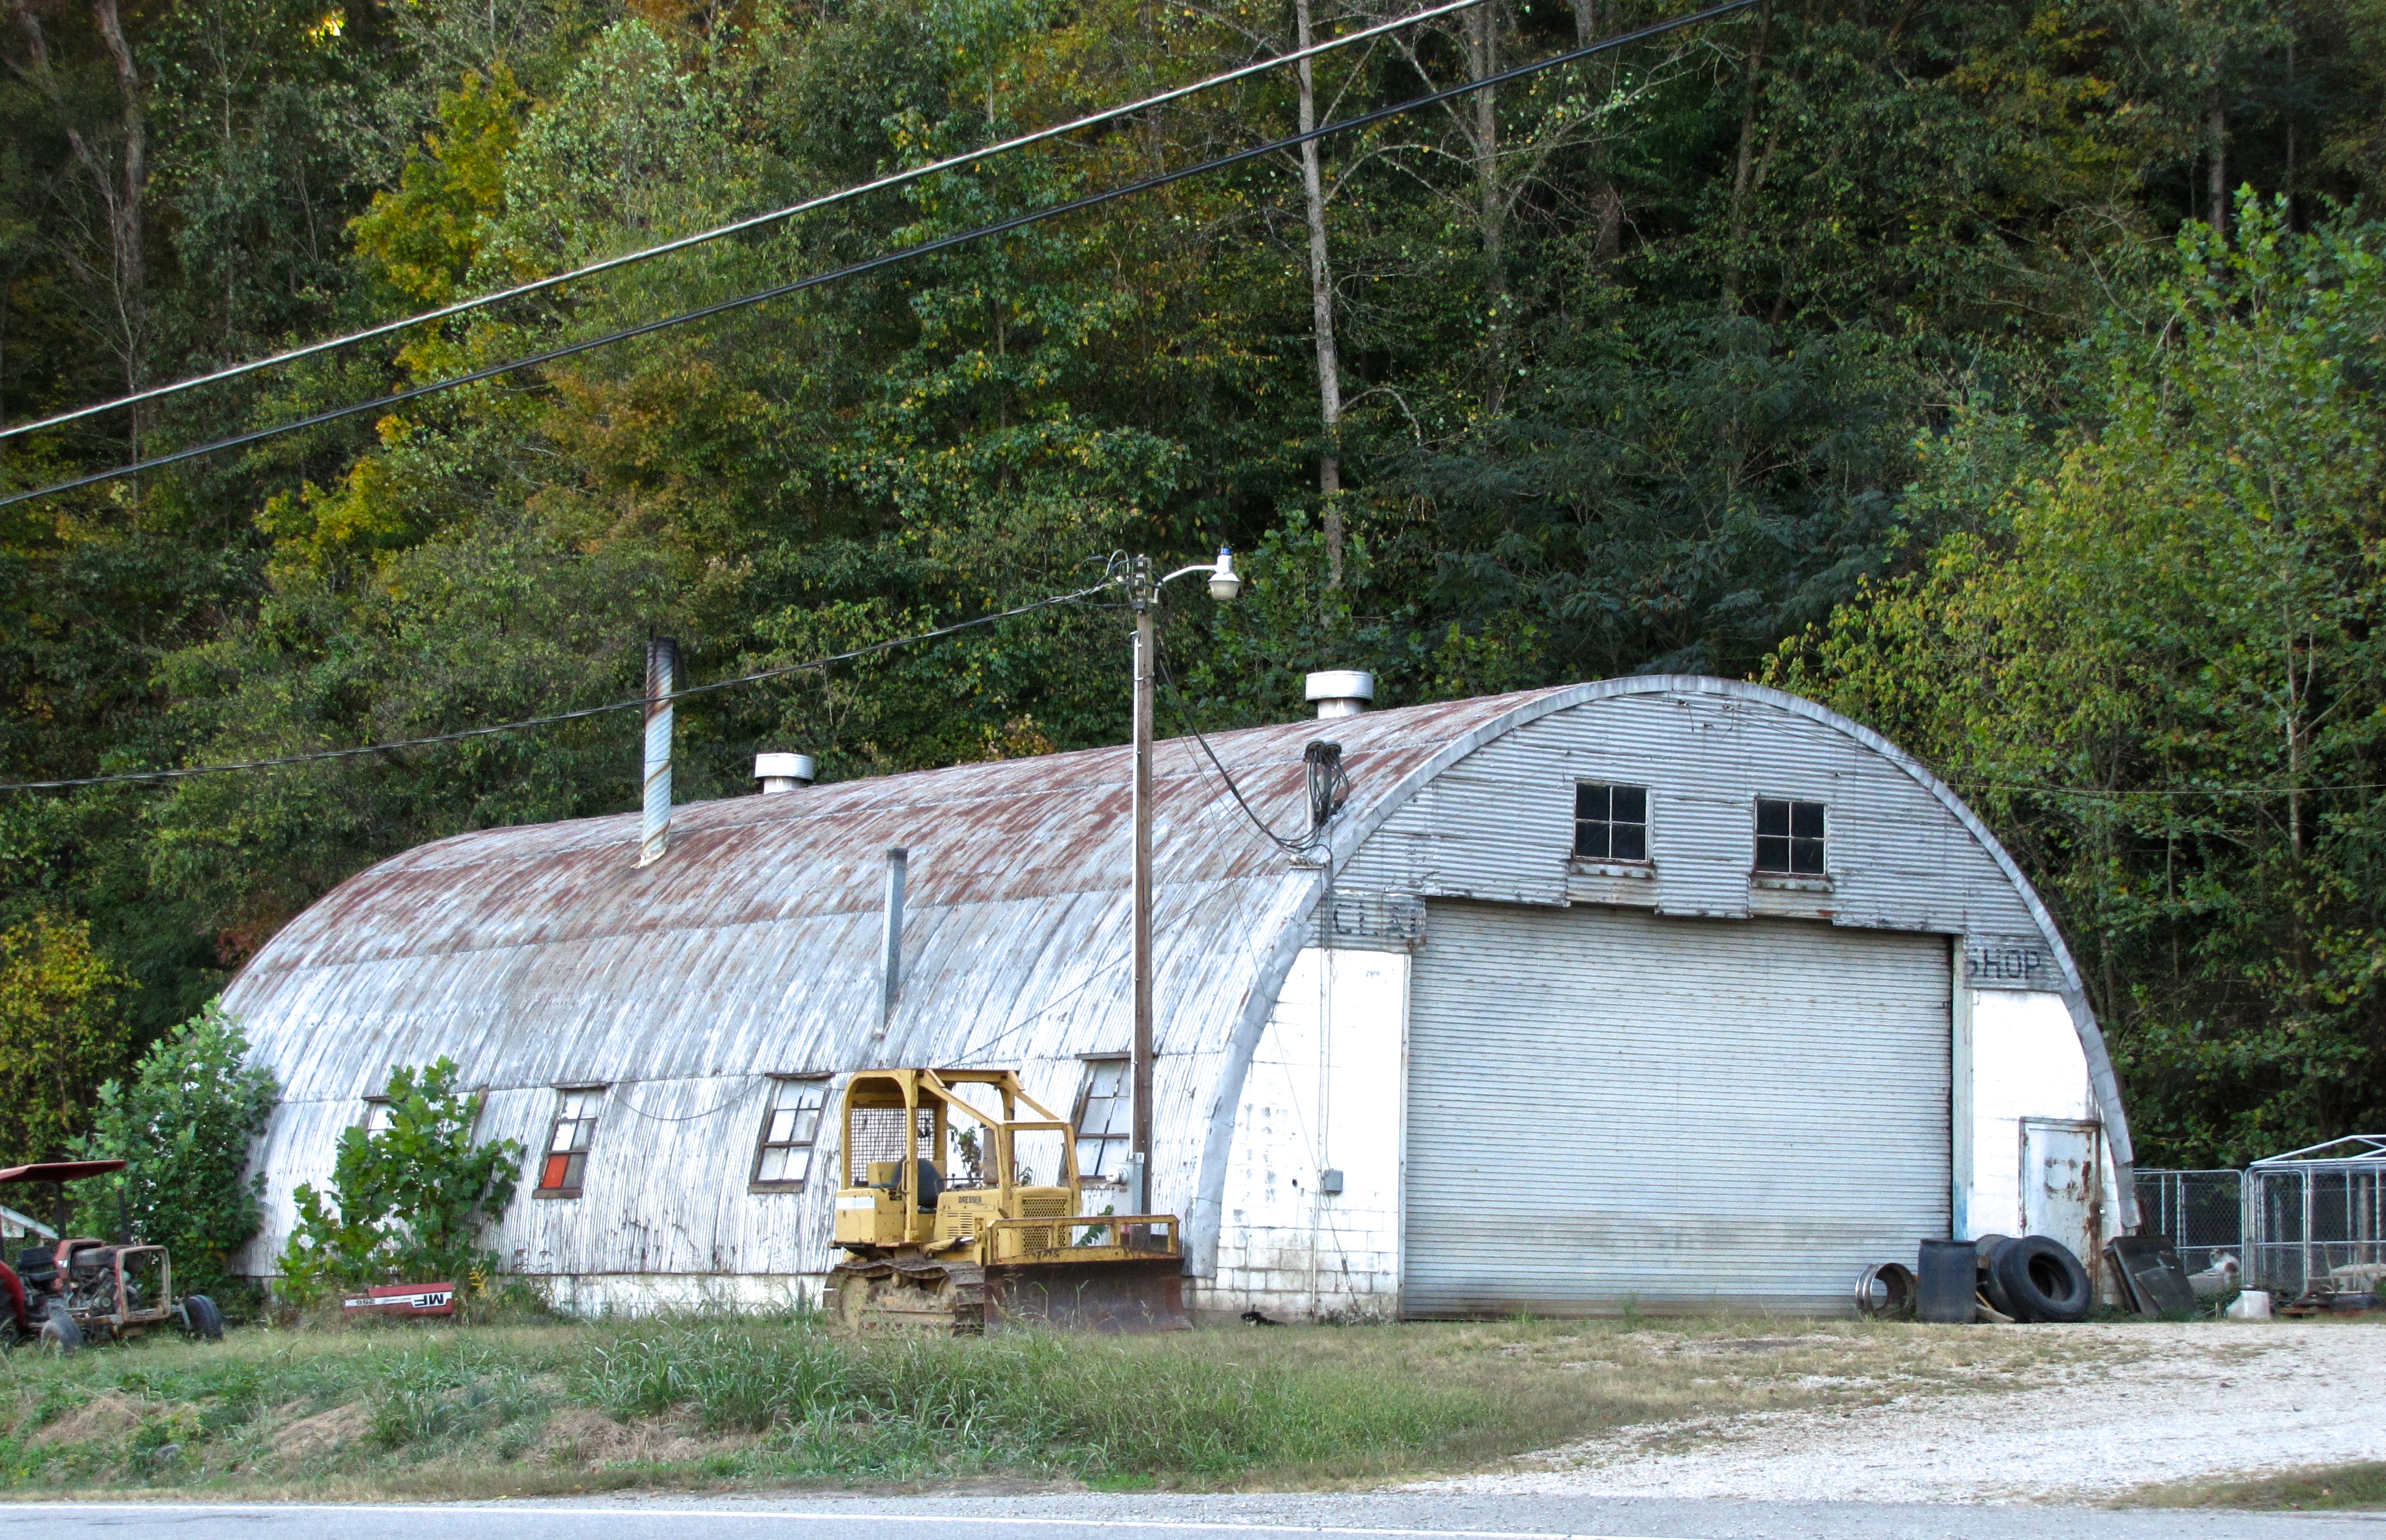 quonset hut in Terms Of Service, RI